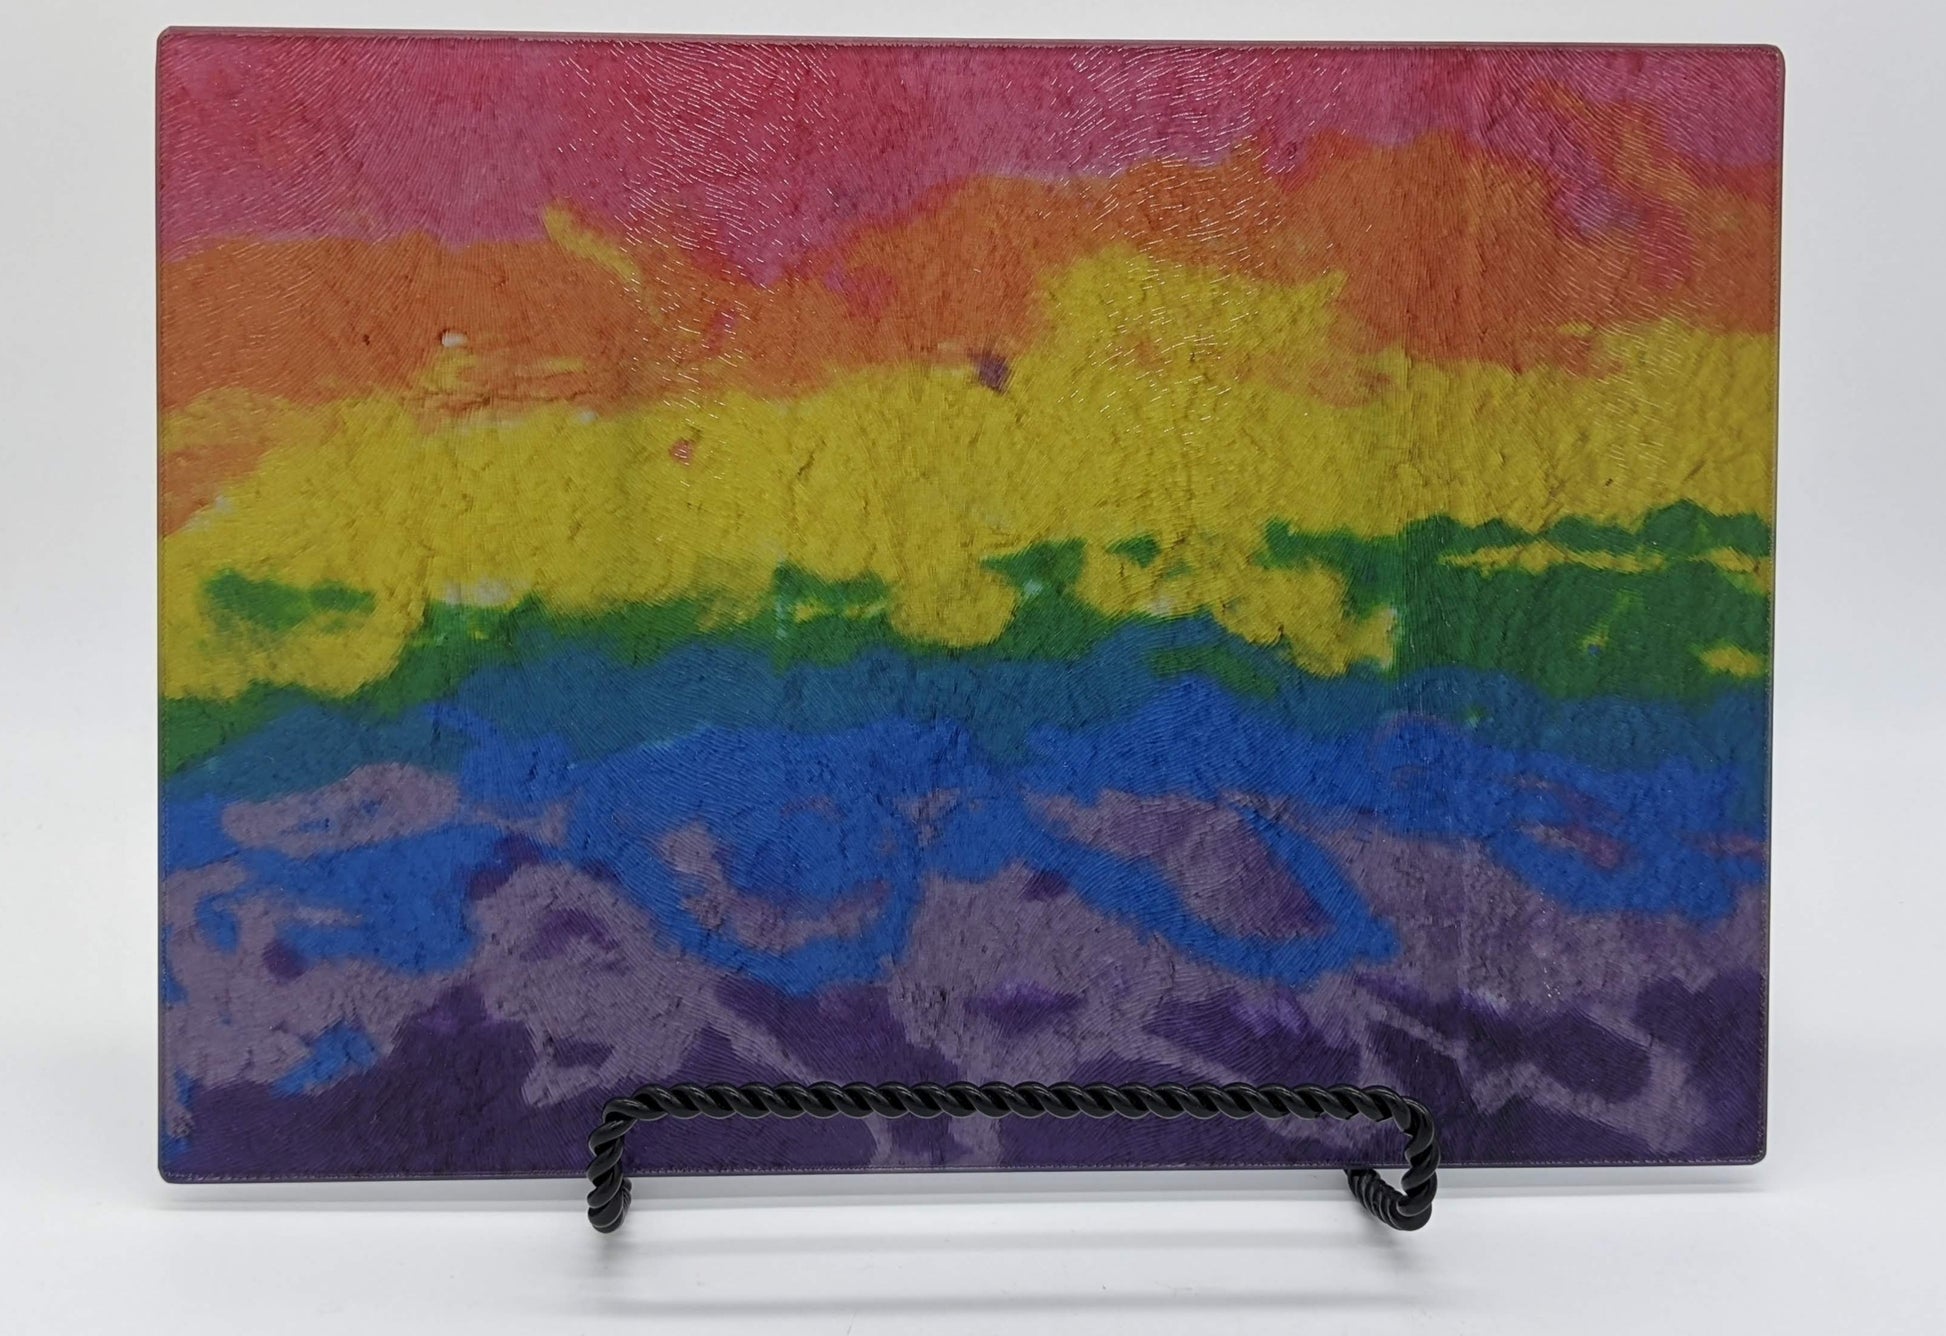 cutting board with the image of horizontal rainbow colors